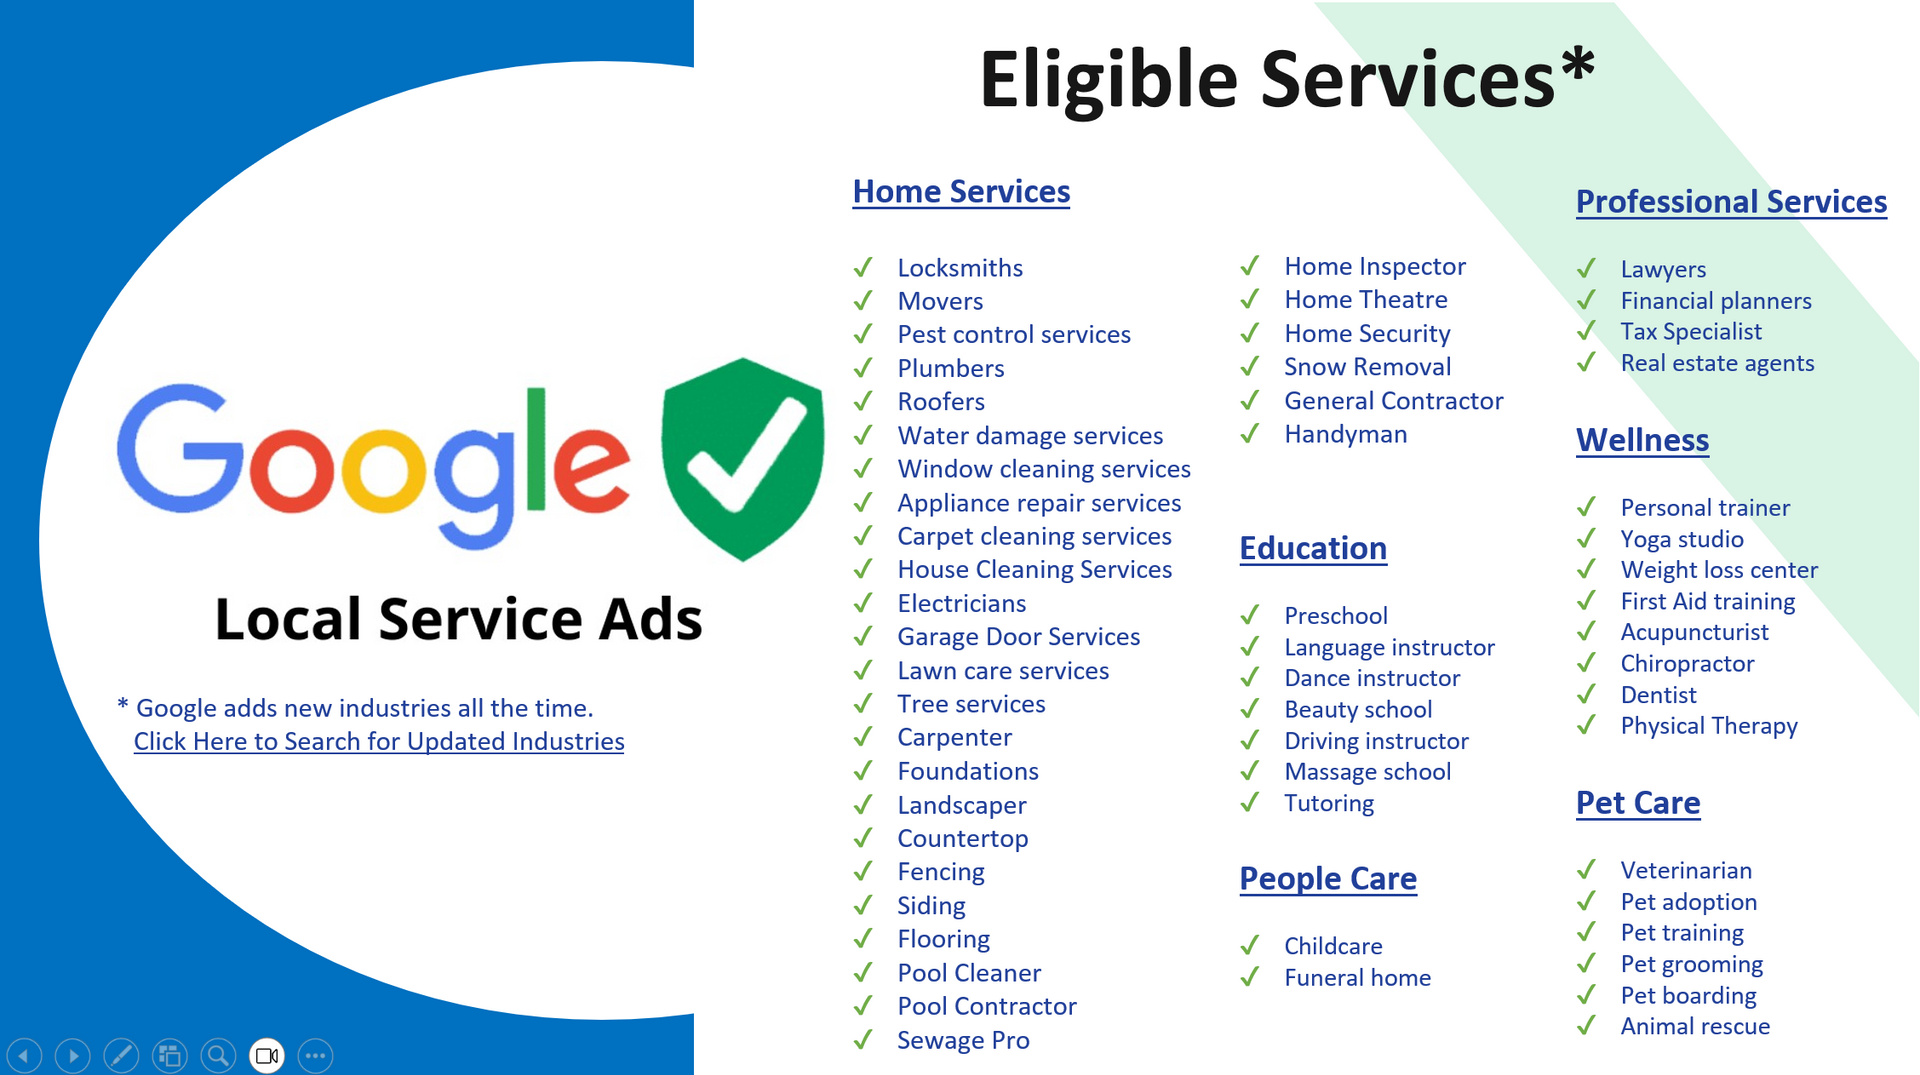 A google logo with a list of local service ads